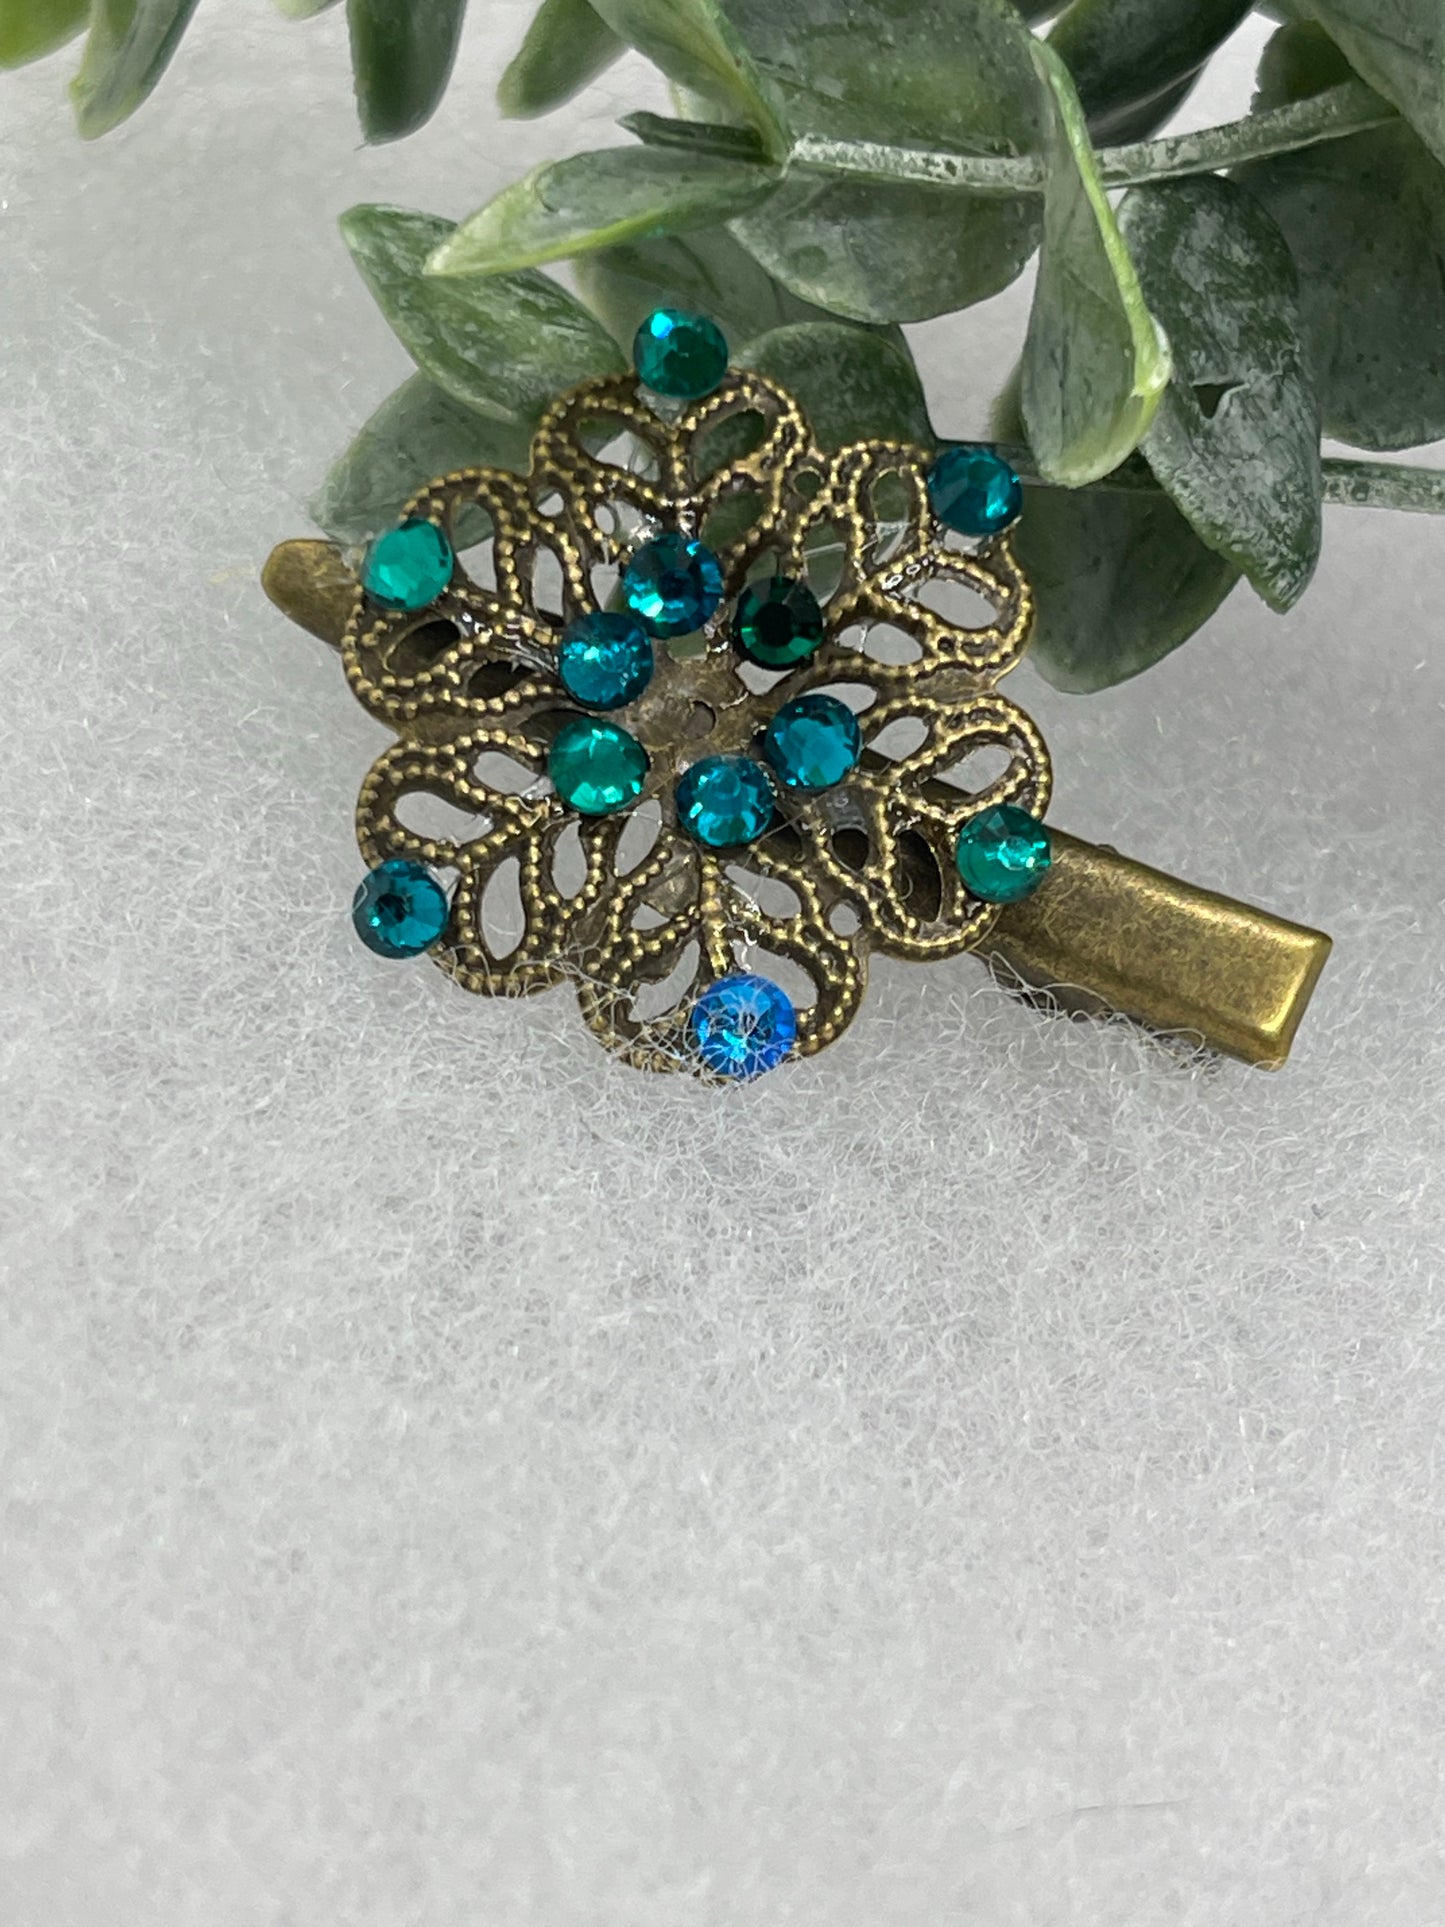 Teal blue Crystal vintage antique style flower hair alligator clip approximately 2.0” long Handmade hair accessory bridal wedding Retro